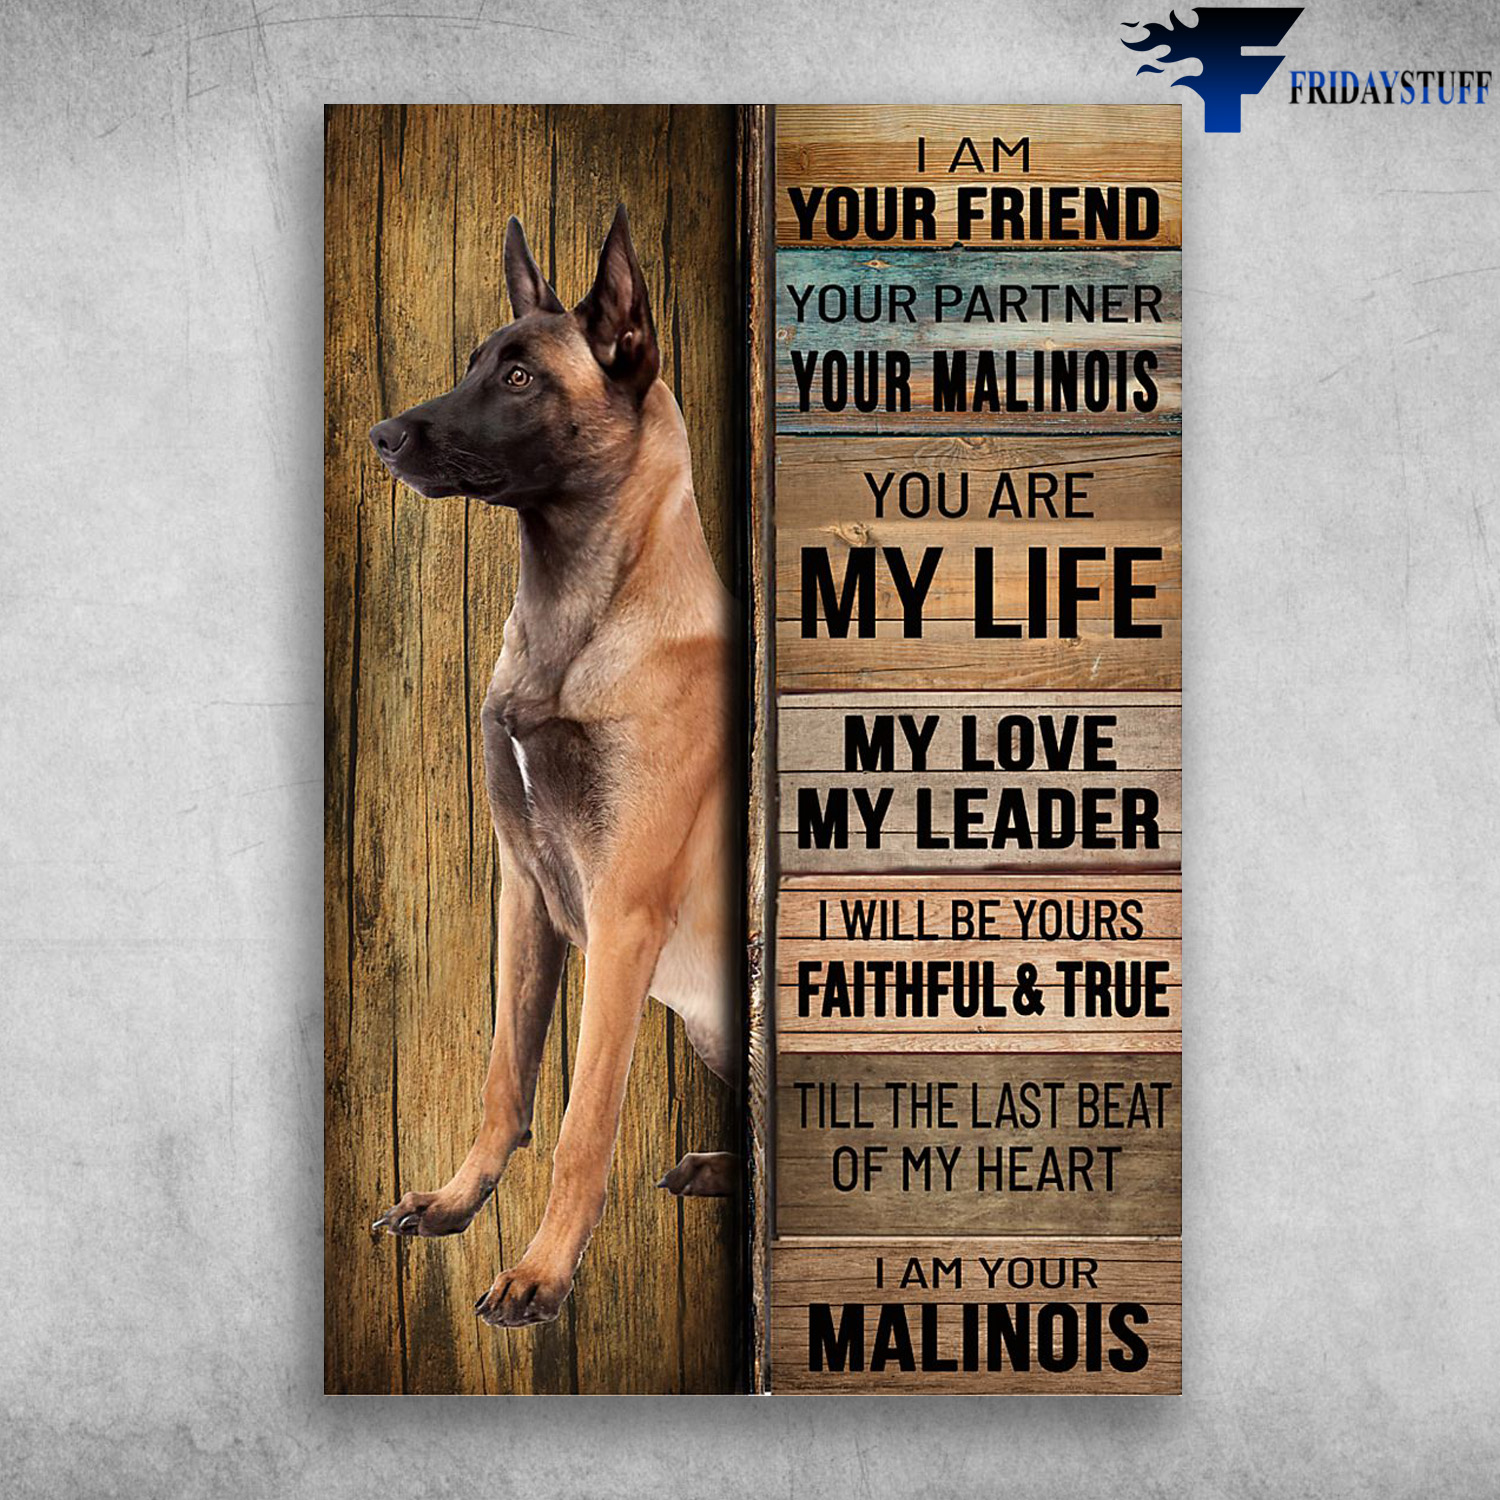 Malinois Dog - I Am Your Friend, Your Partner, Your Malinois, You Are My Life, My Love, My Leader, I Will Be Yours Faithful And True, Till The Last Beat Of My Heart, I Am Your Malinois